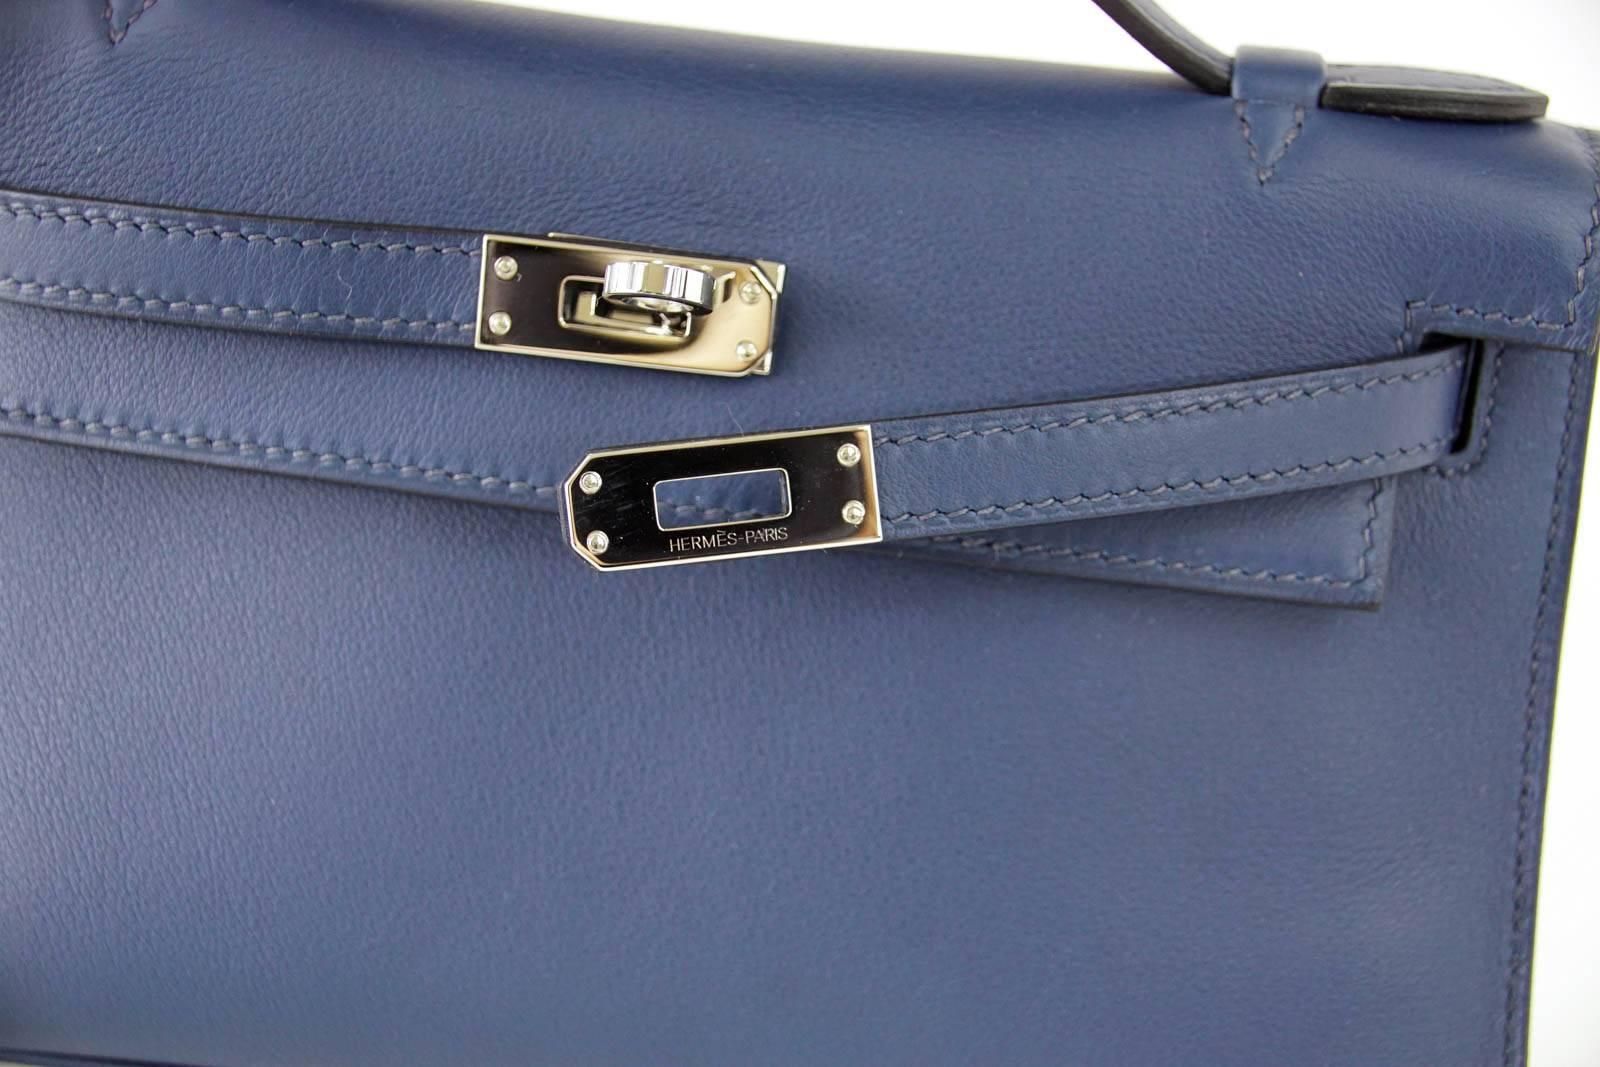 Guaranteed authentic HERMES beautiful Bleu de Prusse in Swift Leather.
So chic with Palladium hardware.
This treasure is easily carried day or night, casual to dressy.  
Signature stamp on interior.
Small interior compartment.
Comes with sleeper and